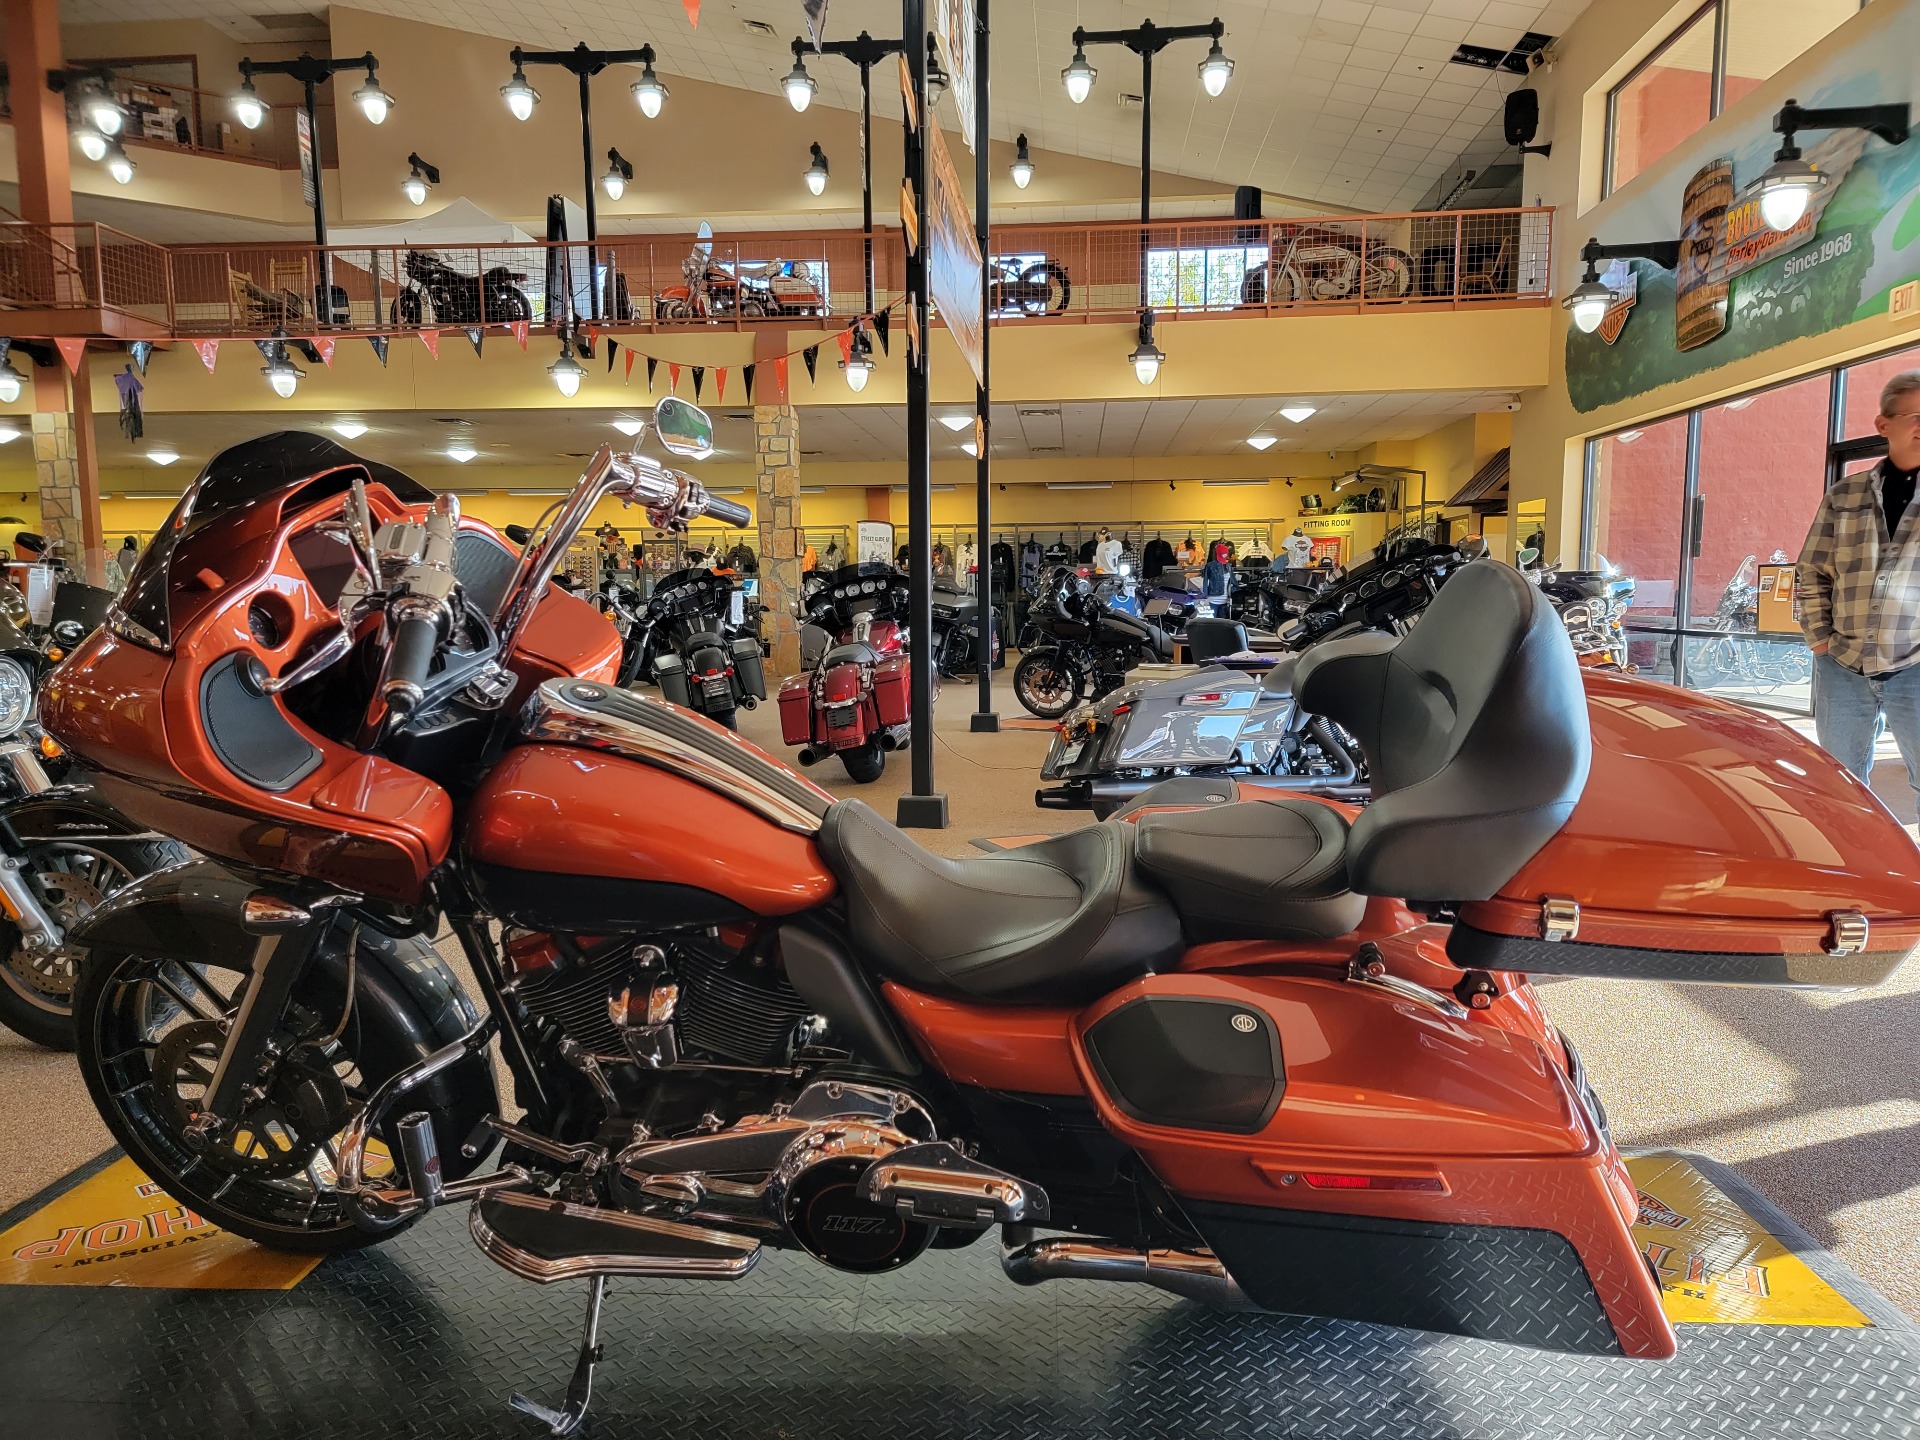 2018 Harley-Davidson CVO™ Road Glide® in Knoxville, Tennessee - Photo 5